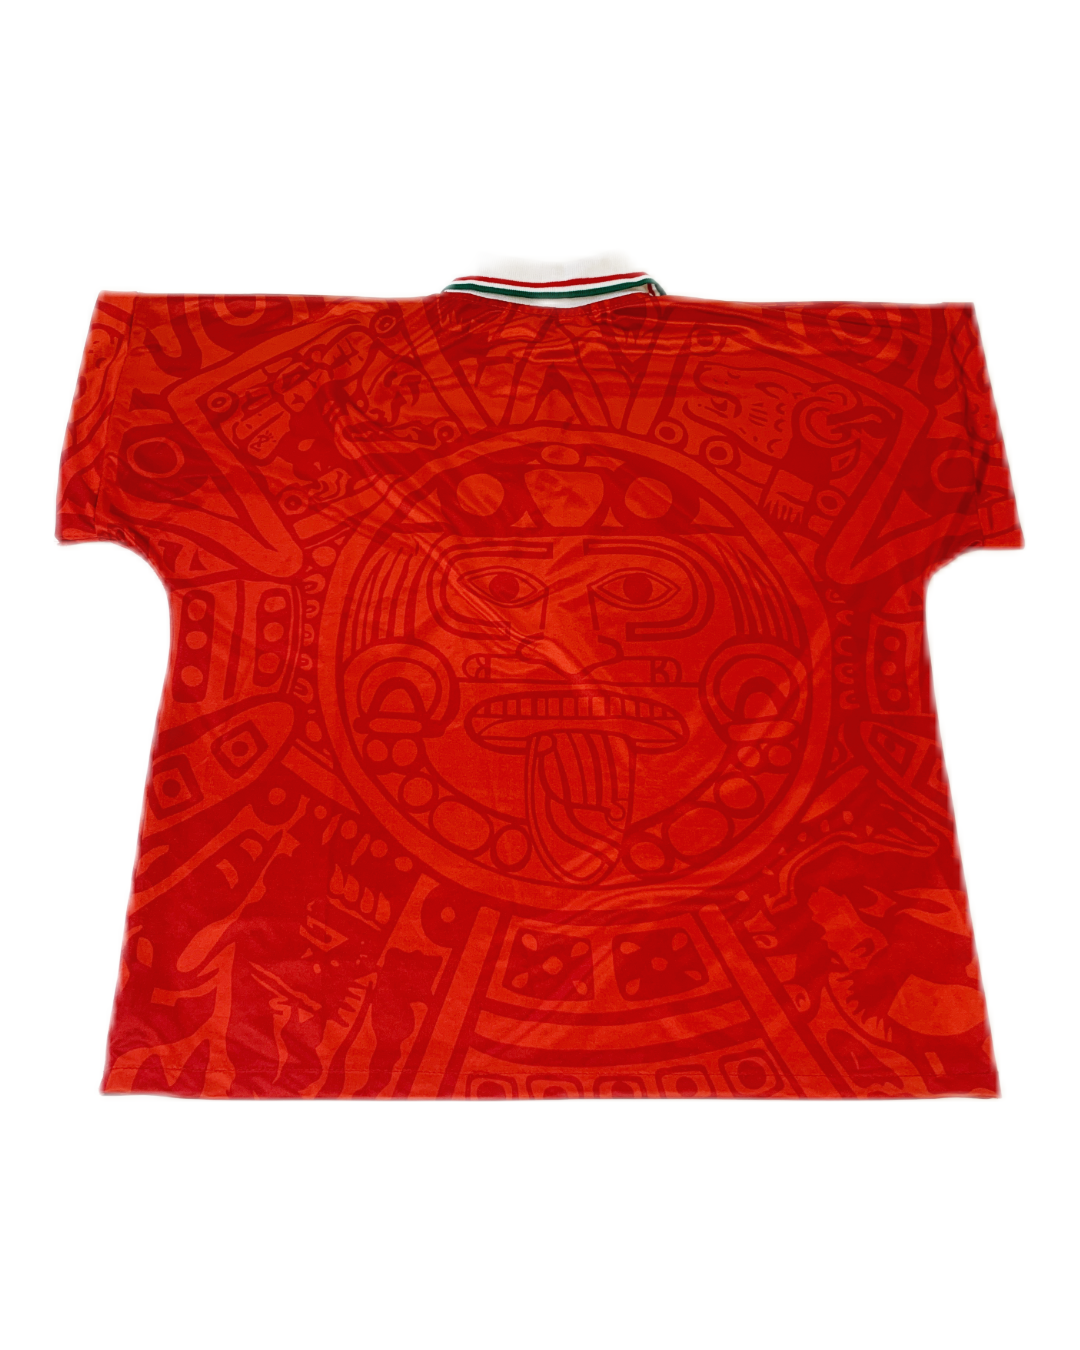 Mexico Red Vintage Jersey - XL